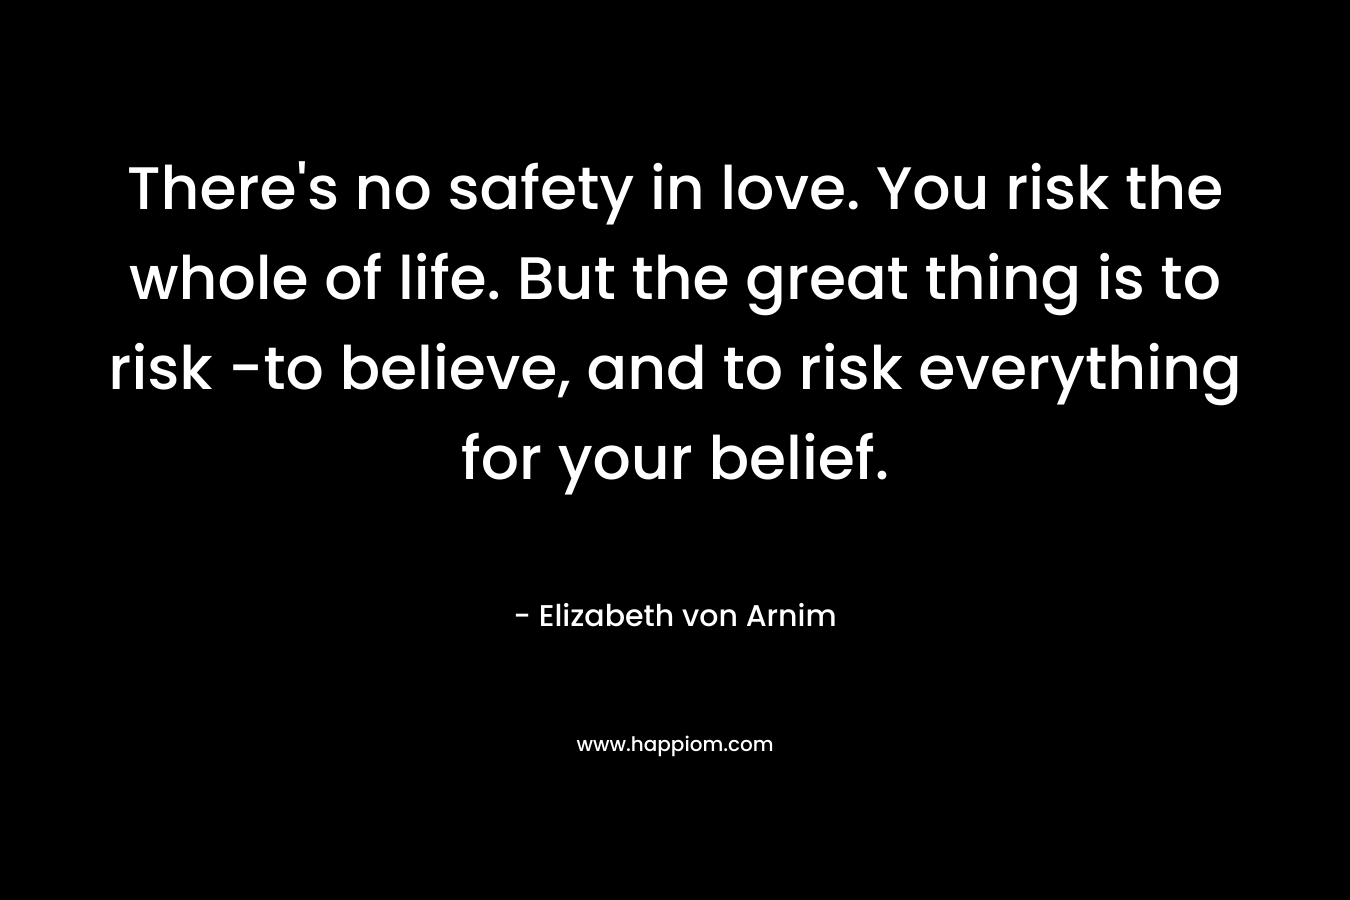 There's no safety in love. You risk the whole of life. But the great thing is to risk -to believe, and to risk everything for your belief.